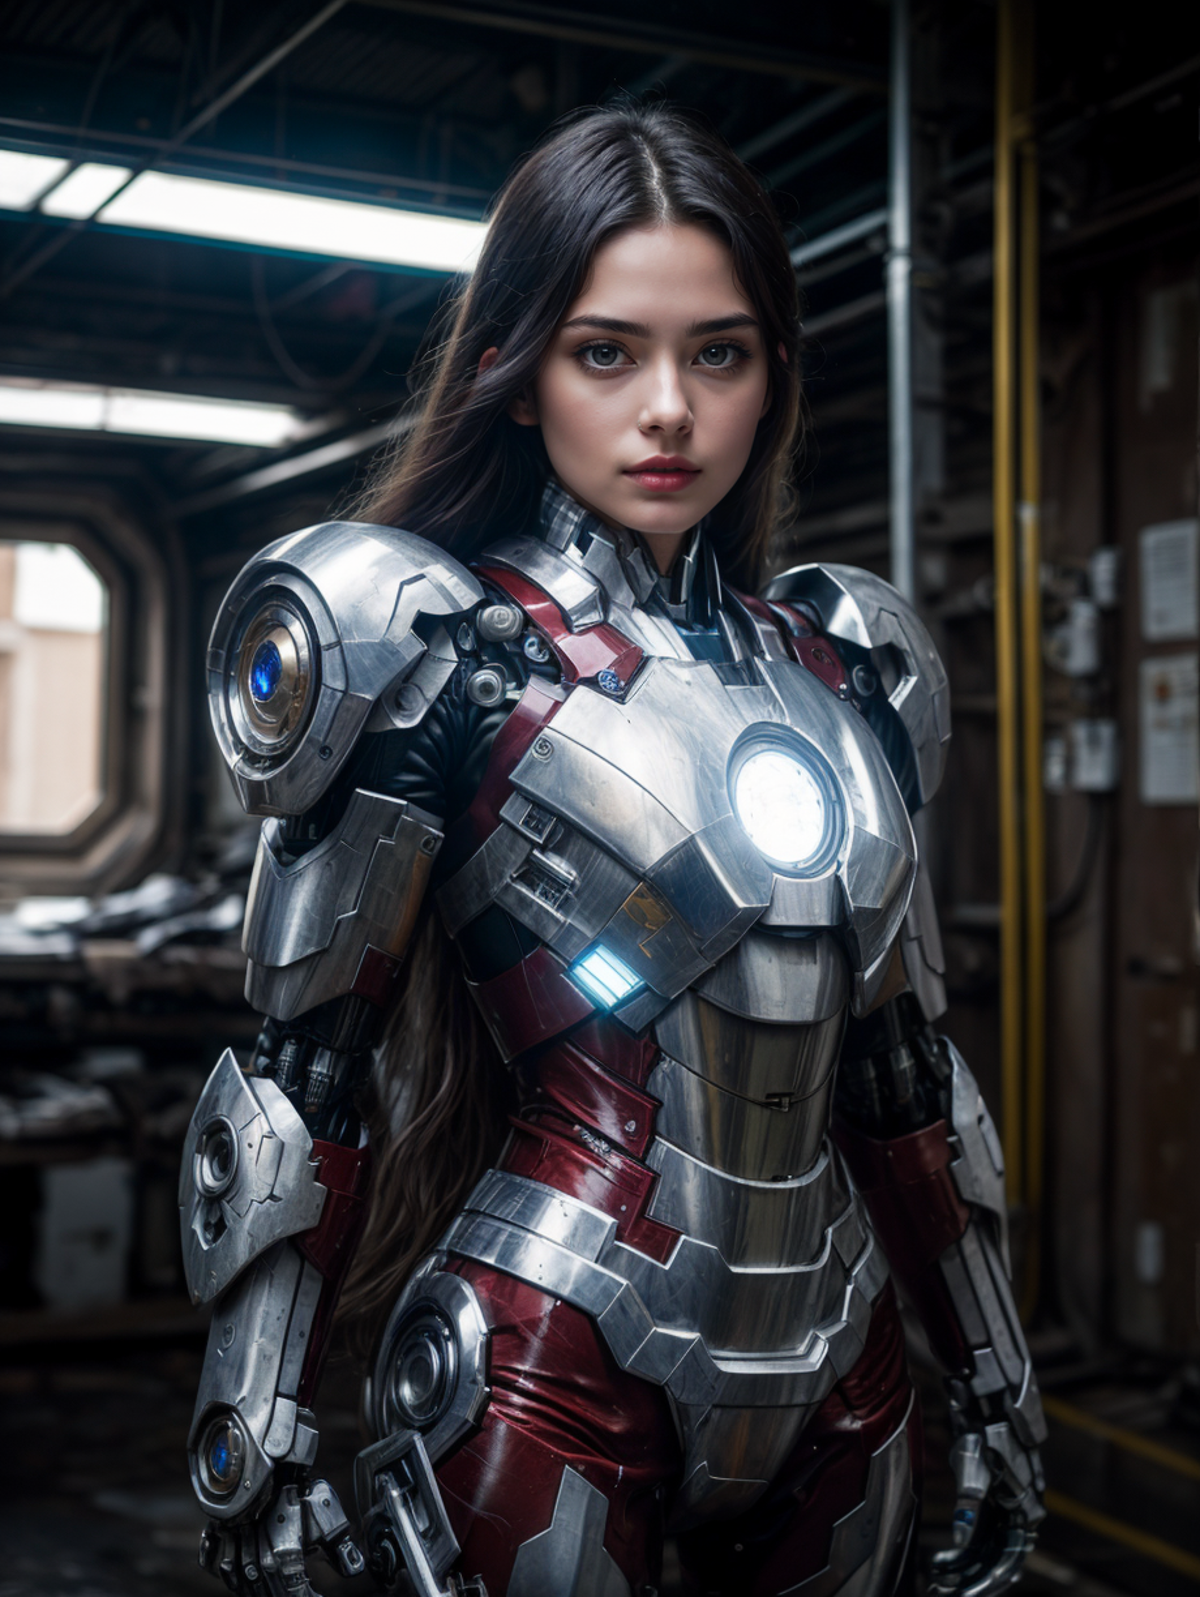 A female Iron Man suit with a red and silver design.